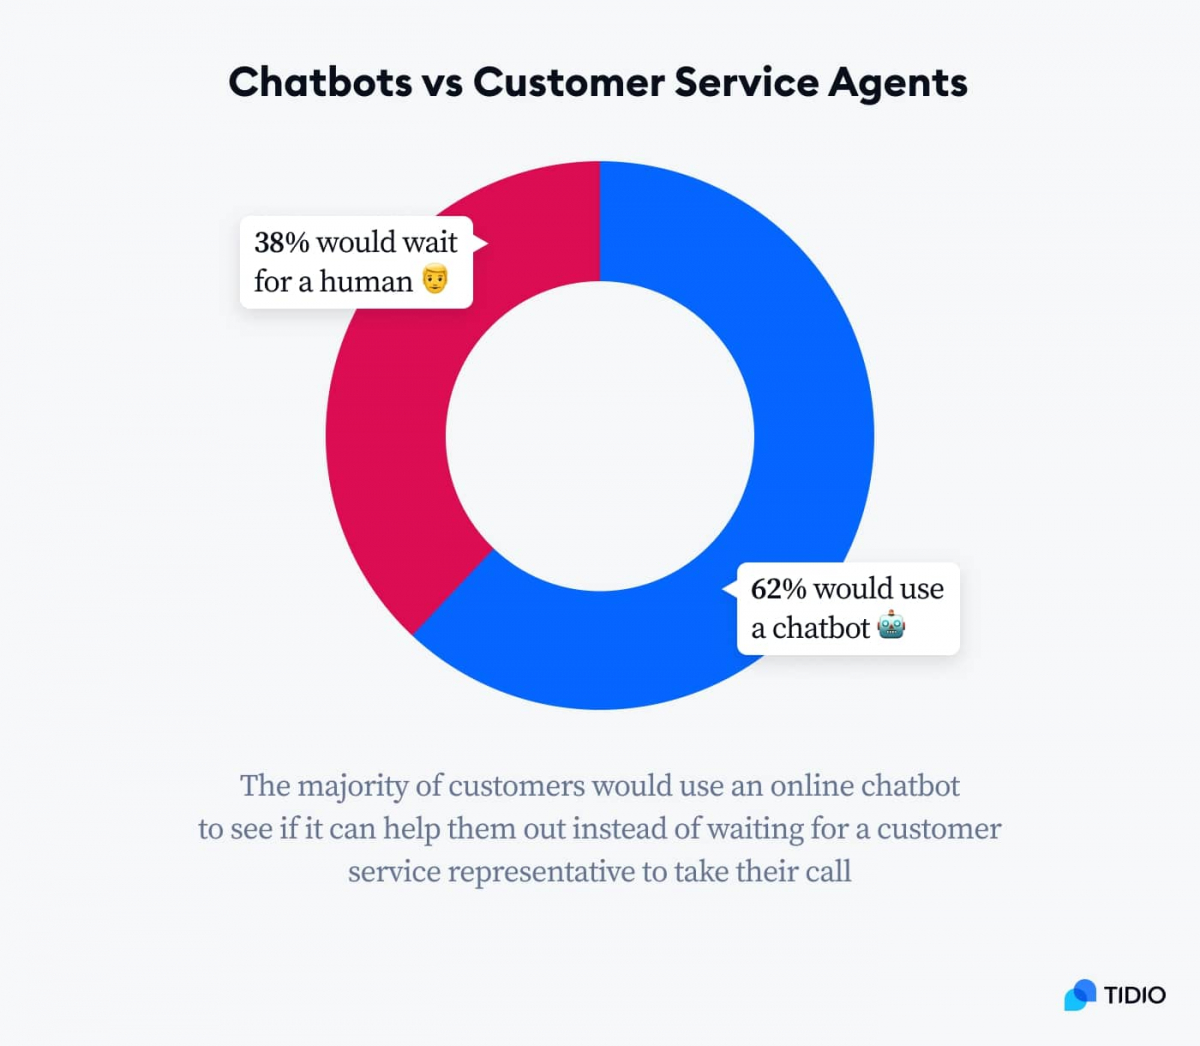 Donut graph showing customers' preferences on contacting chatbots vs customer service agents